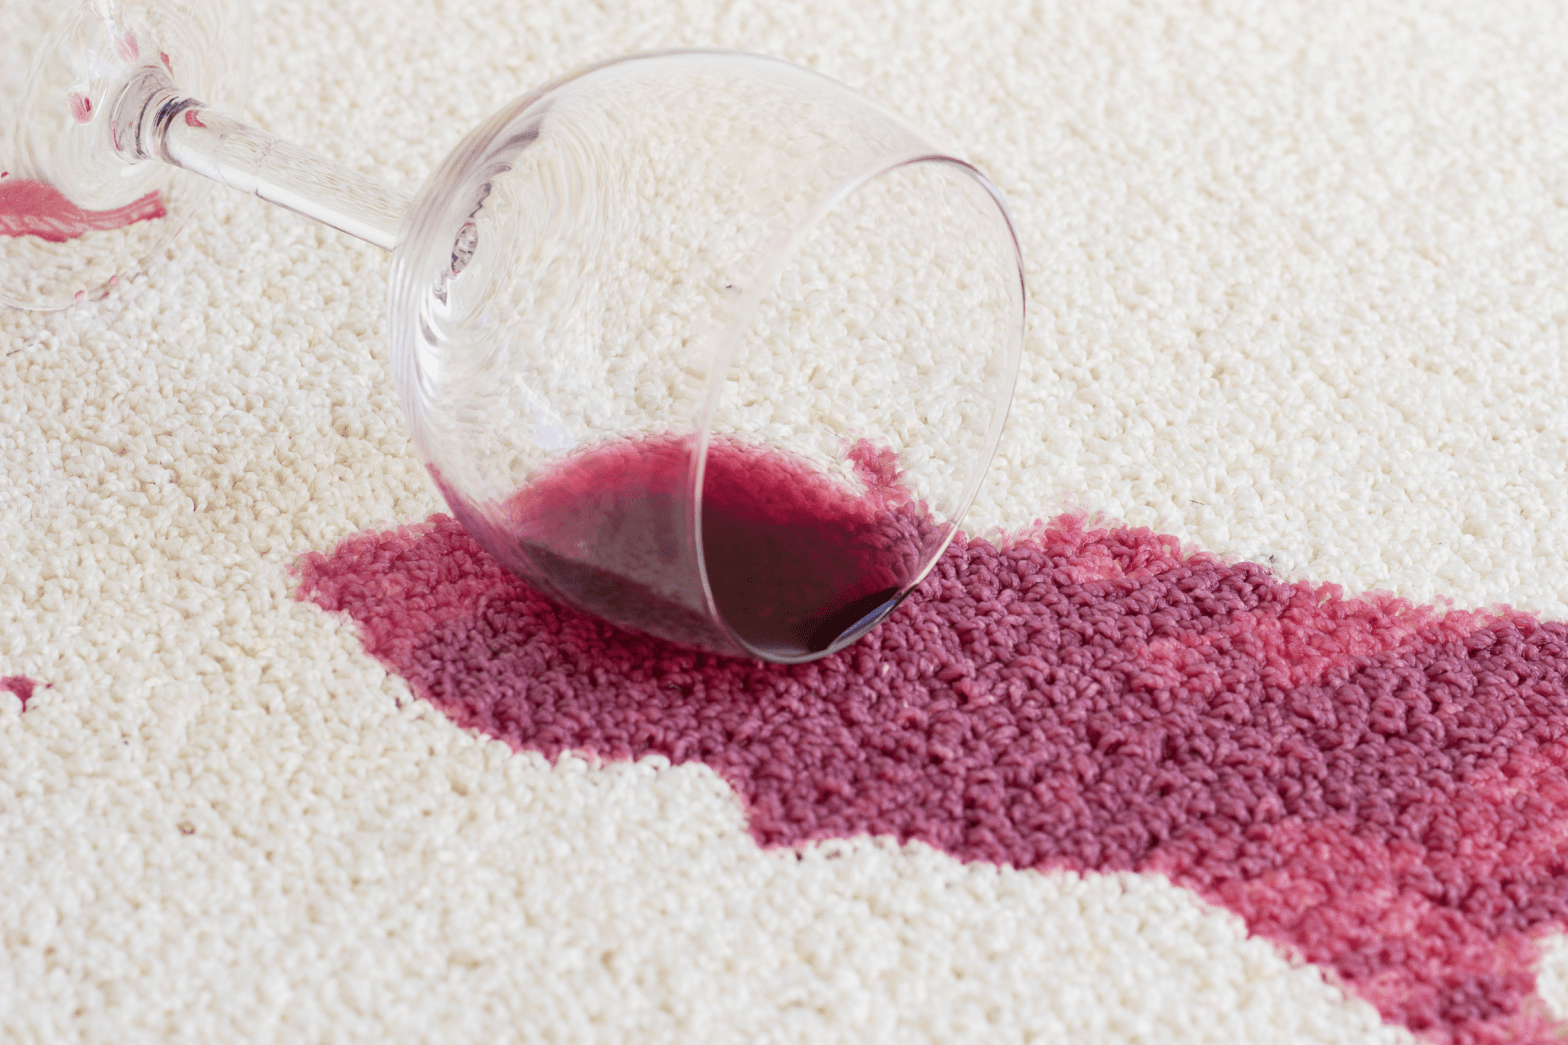 How to Get Red Wine Stains Out of Carpet? â Auckland House ...